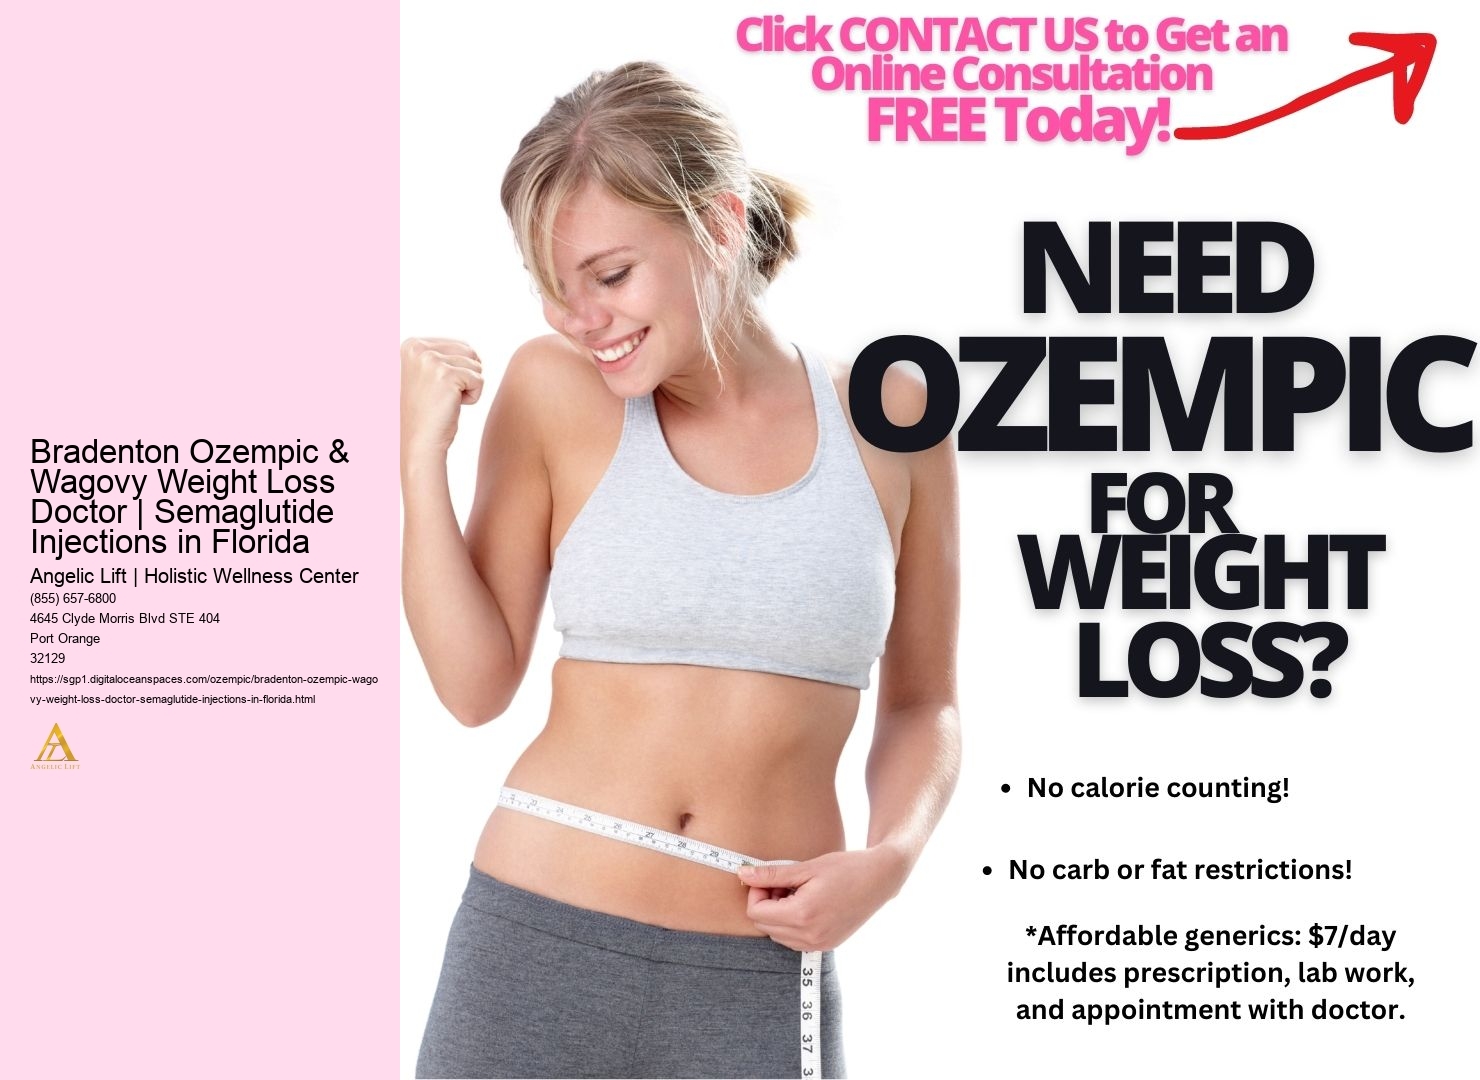 Bradenton Ozempic & Wagovy Weight Loss Doctor | Semaglutide Injections in Florida